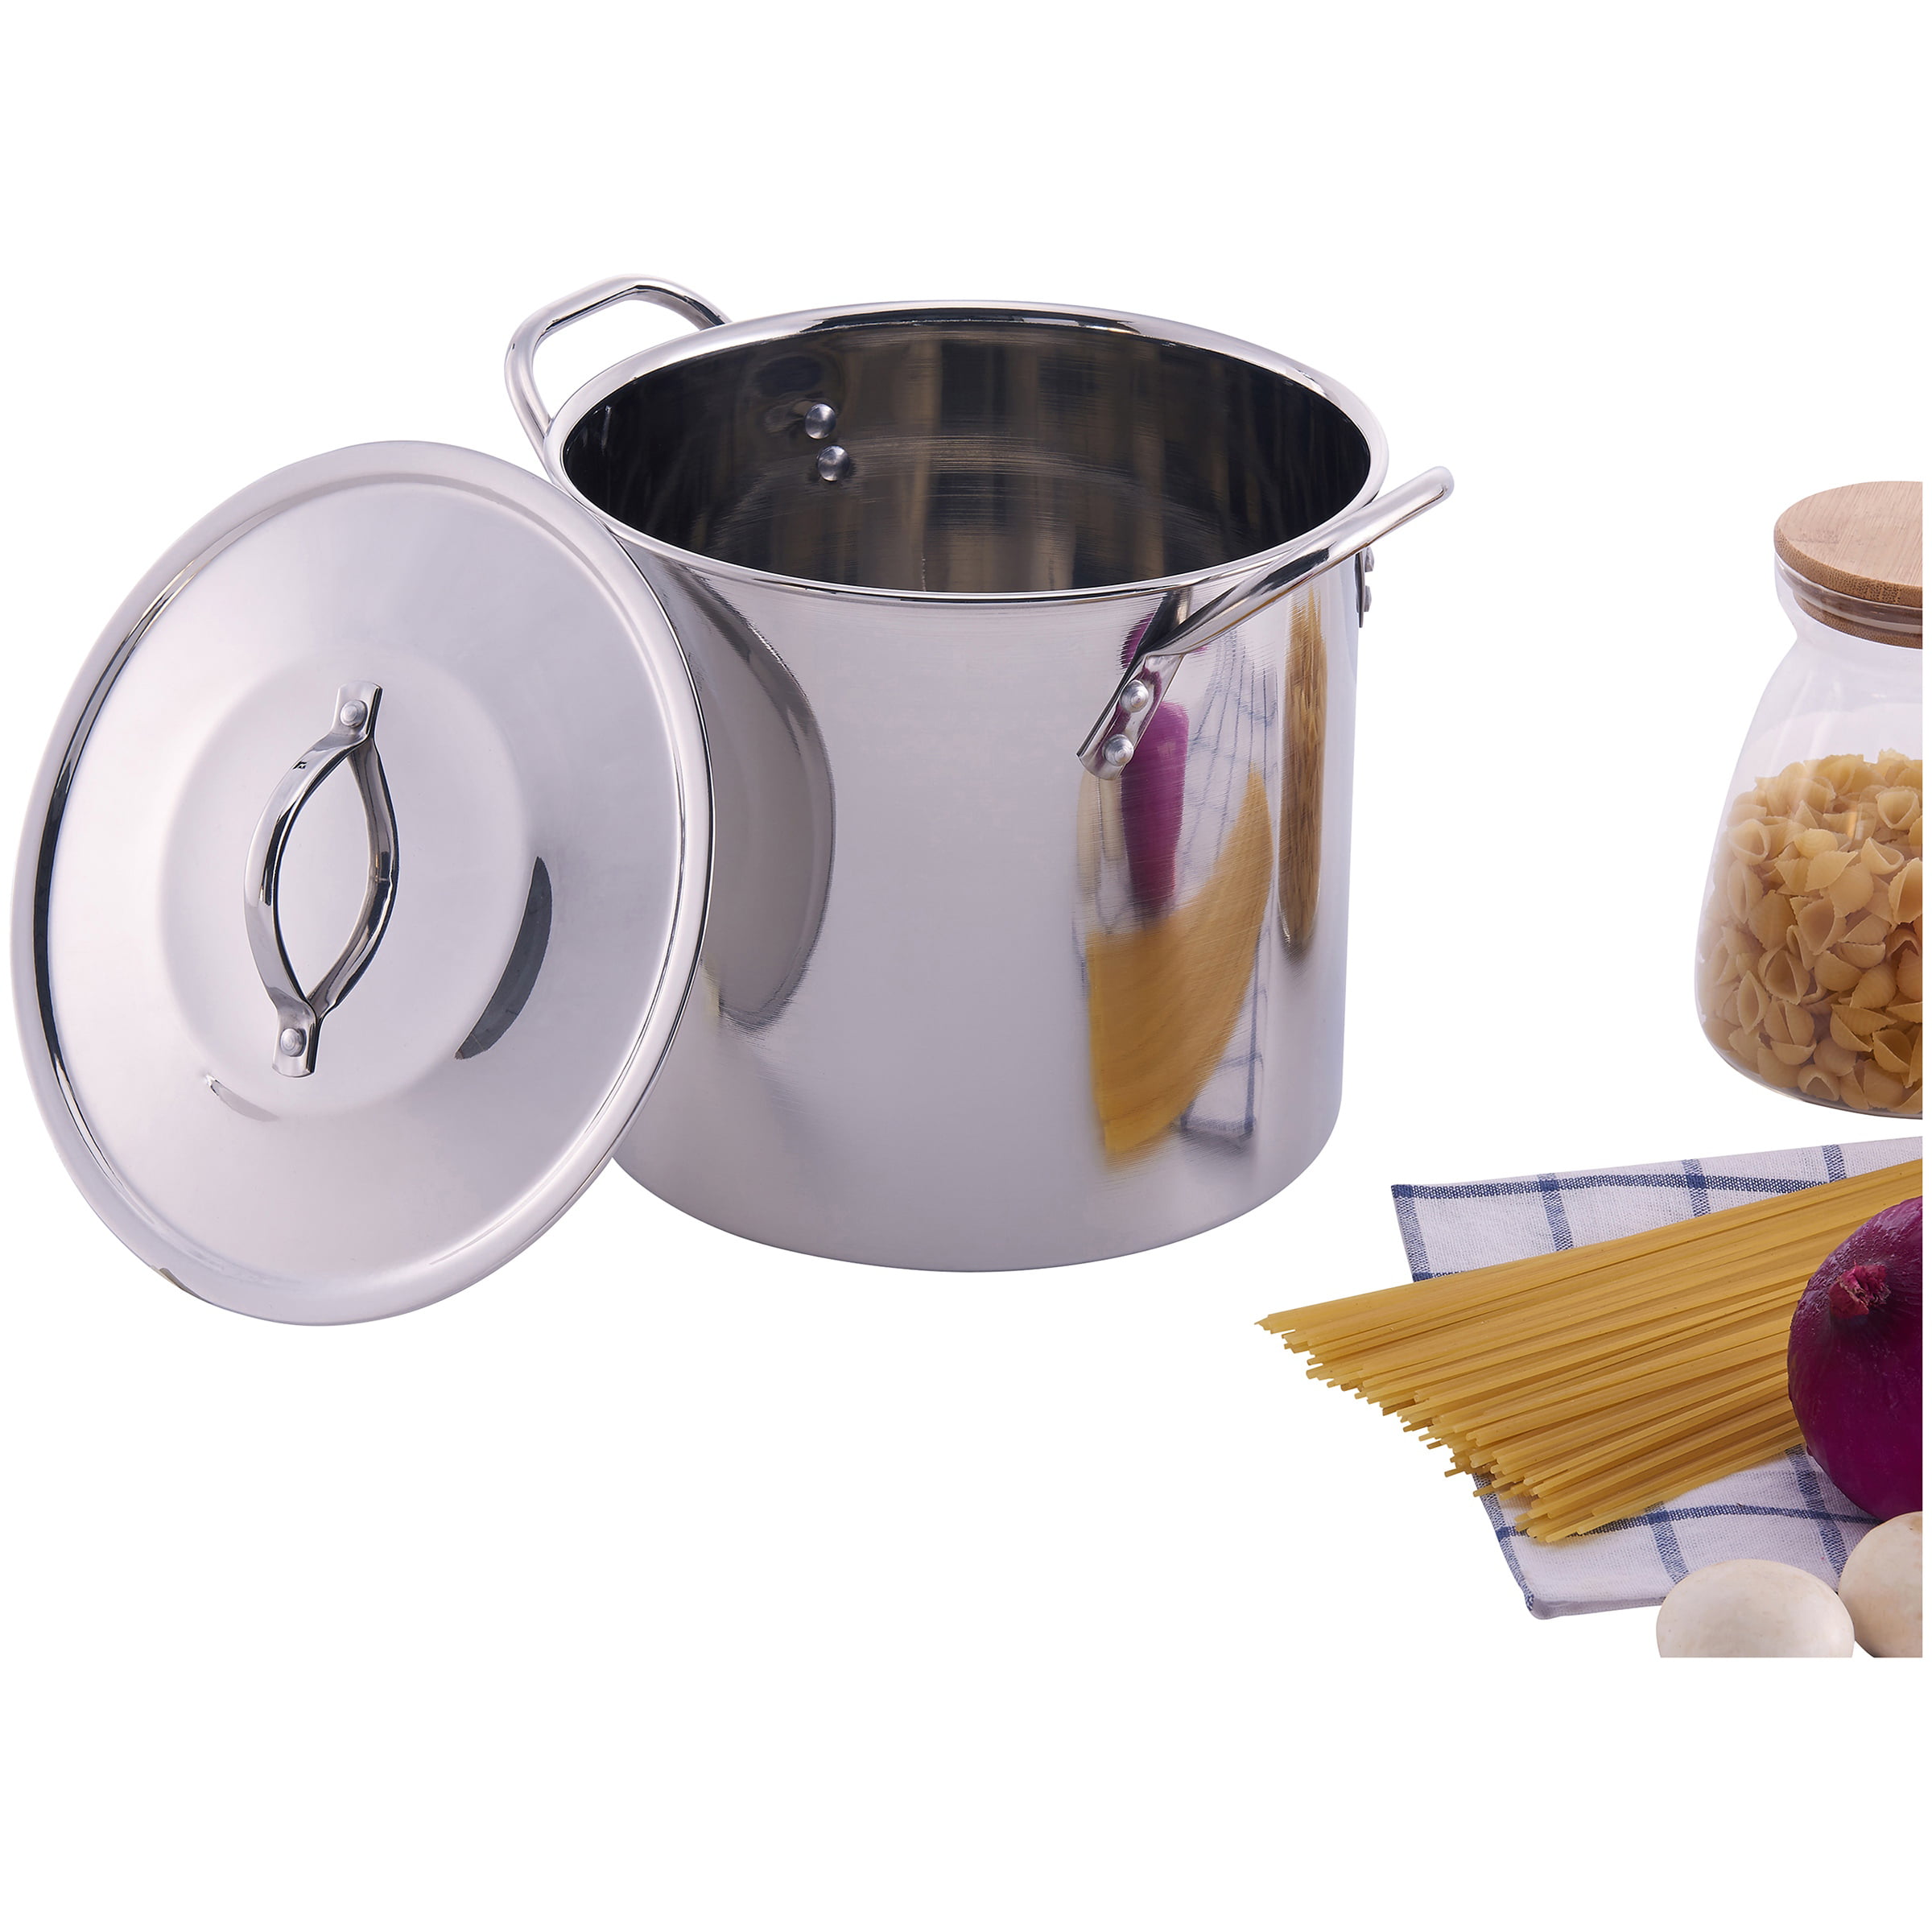 Mainstays 8 Quart Stock Pot with Lid, Stainless Steel 855634004111 | eBay Mainstays Stainless Steel Stock Pot With Lid